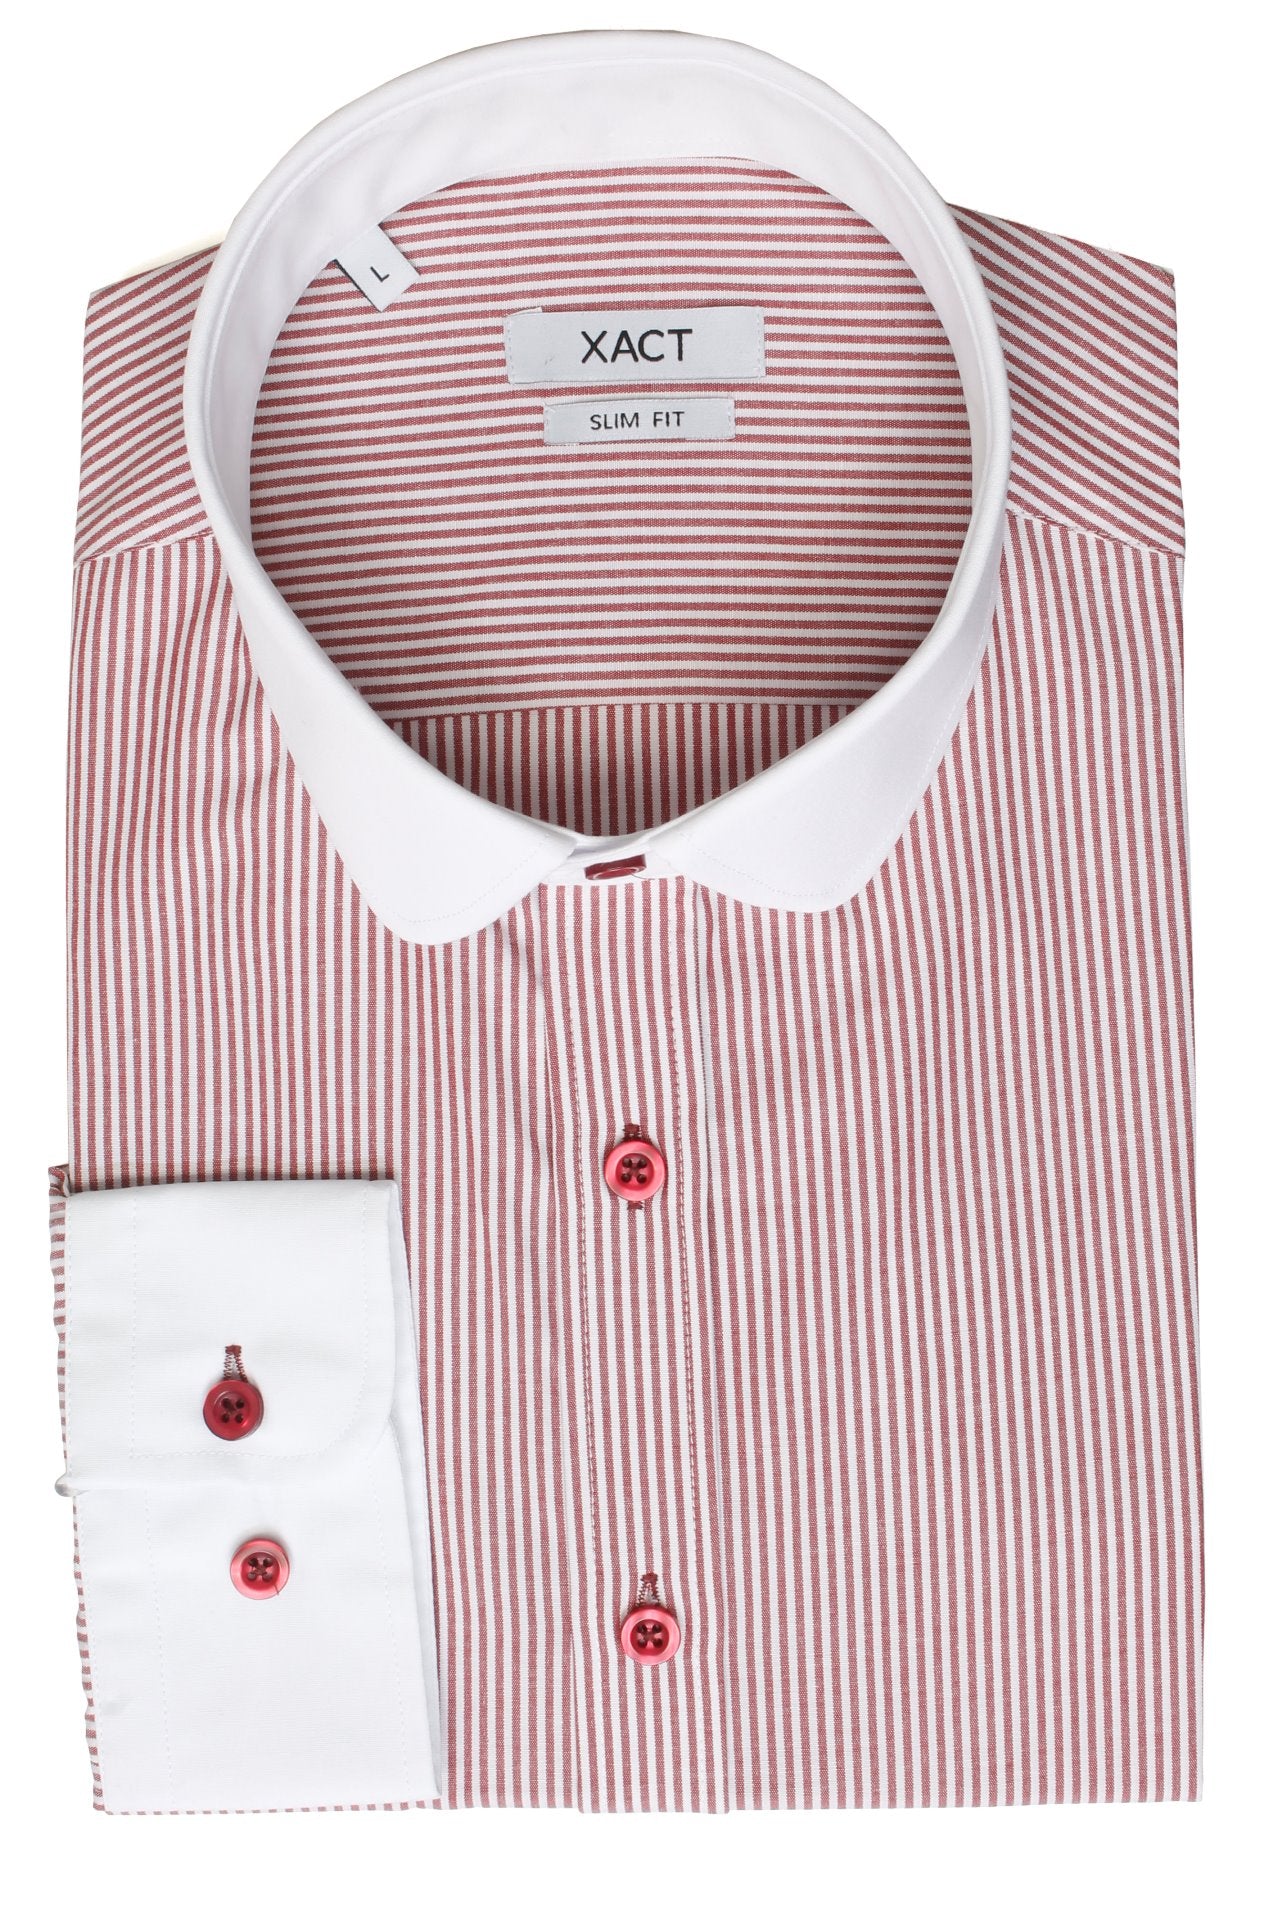 Xact Men's Long-Sleeved Striped Shirt with White Penny/Club Collar and White Cuffs-4